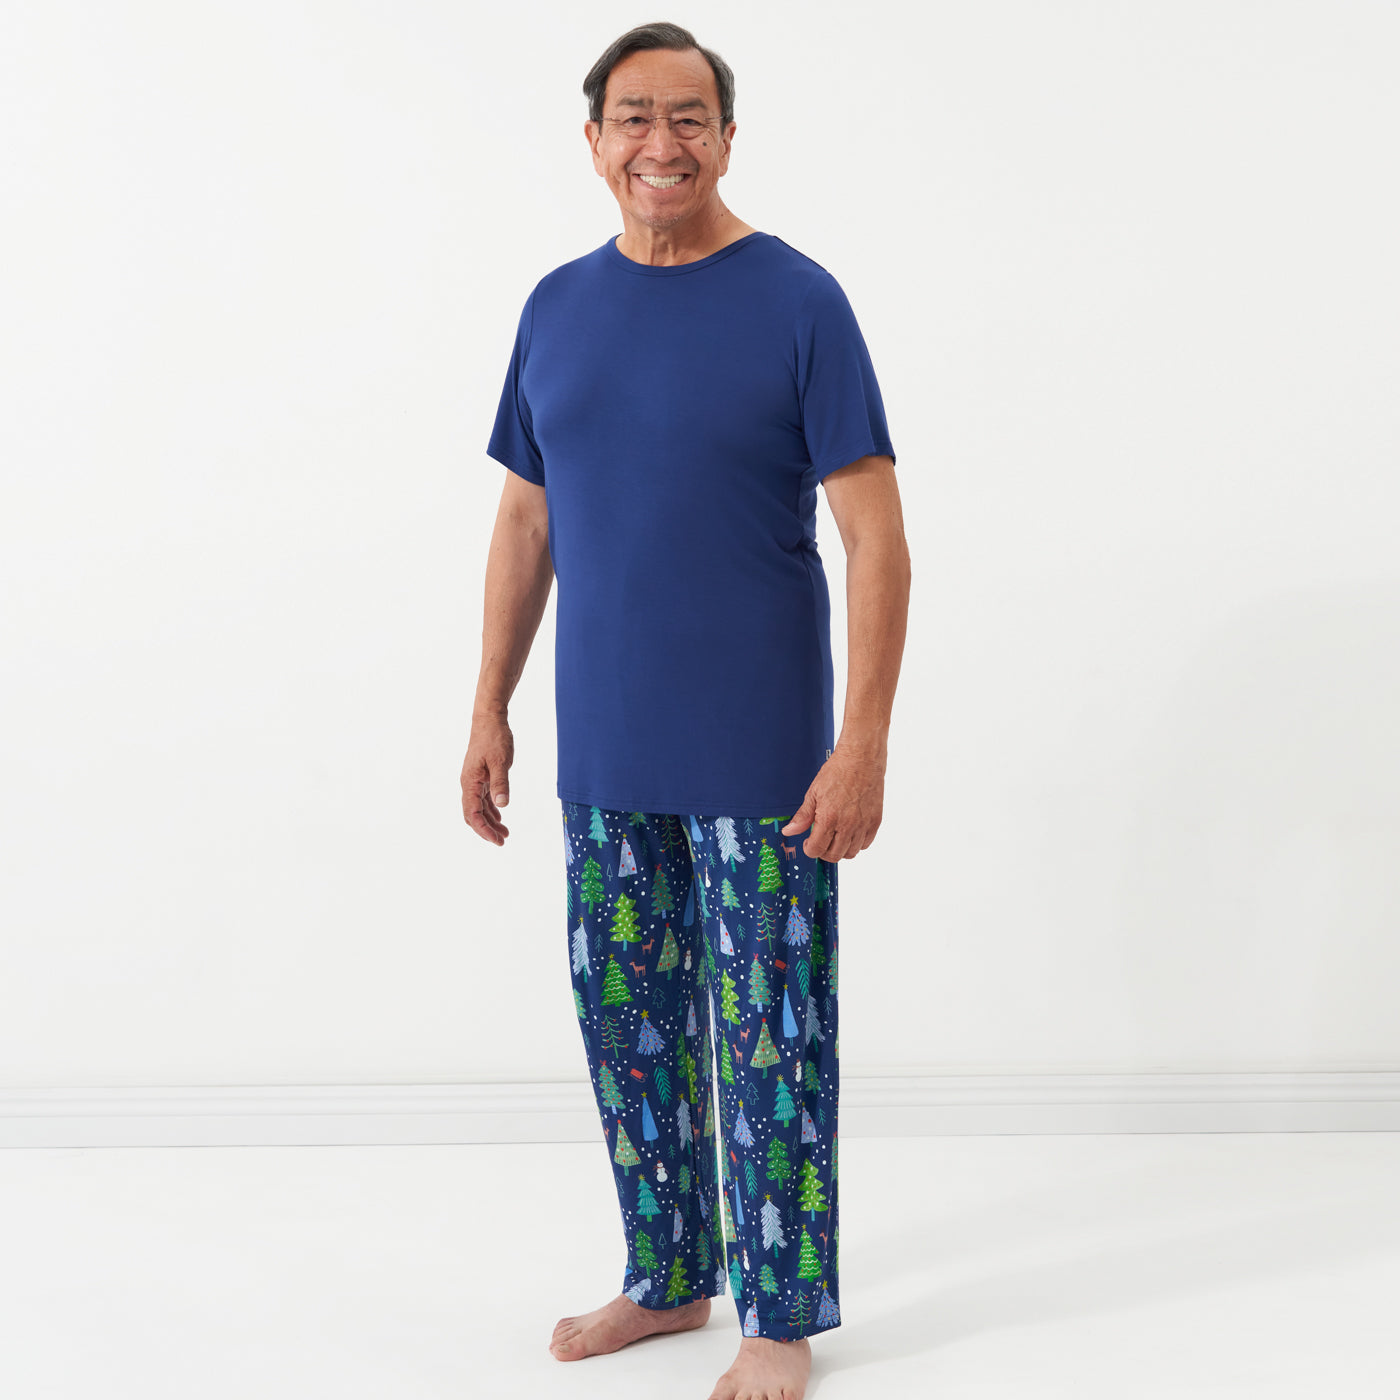 Man is wearing men's Blue Merry and Bright pajama bottoms paired with a solid Sapphire short sleeve pajama top.